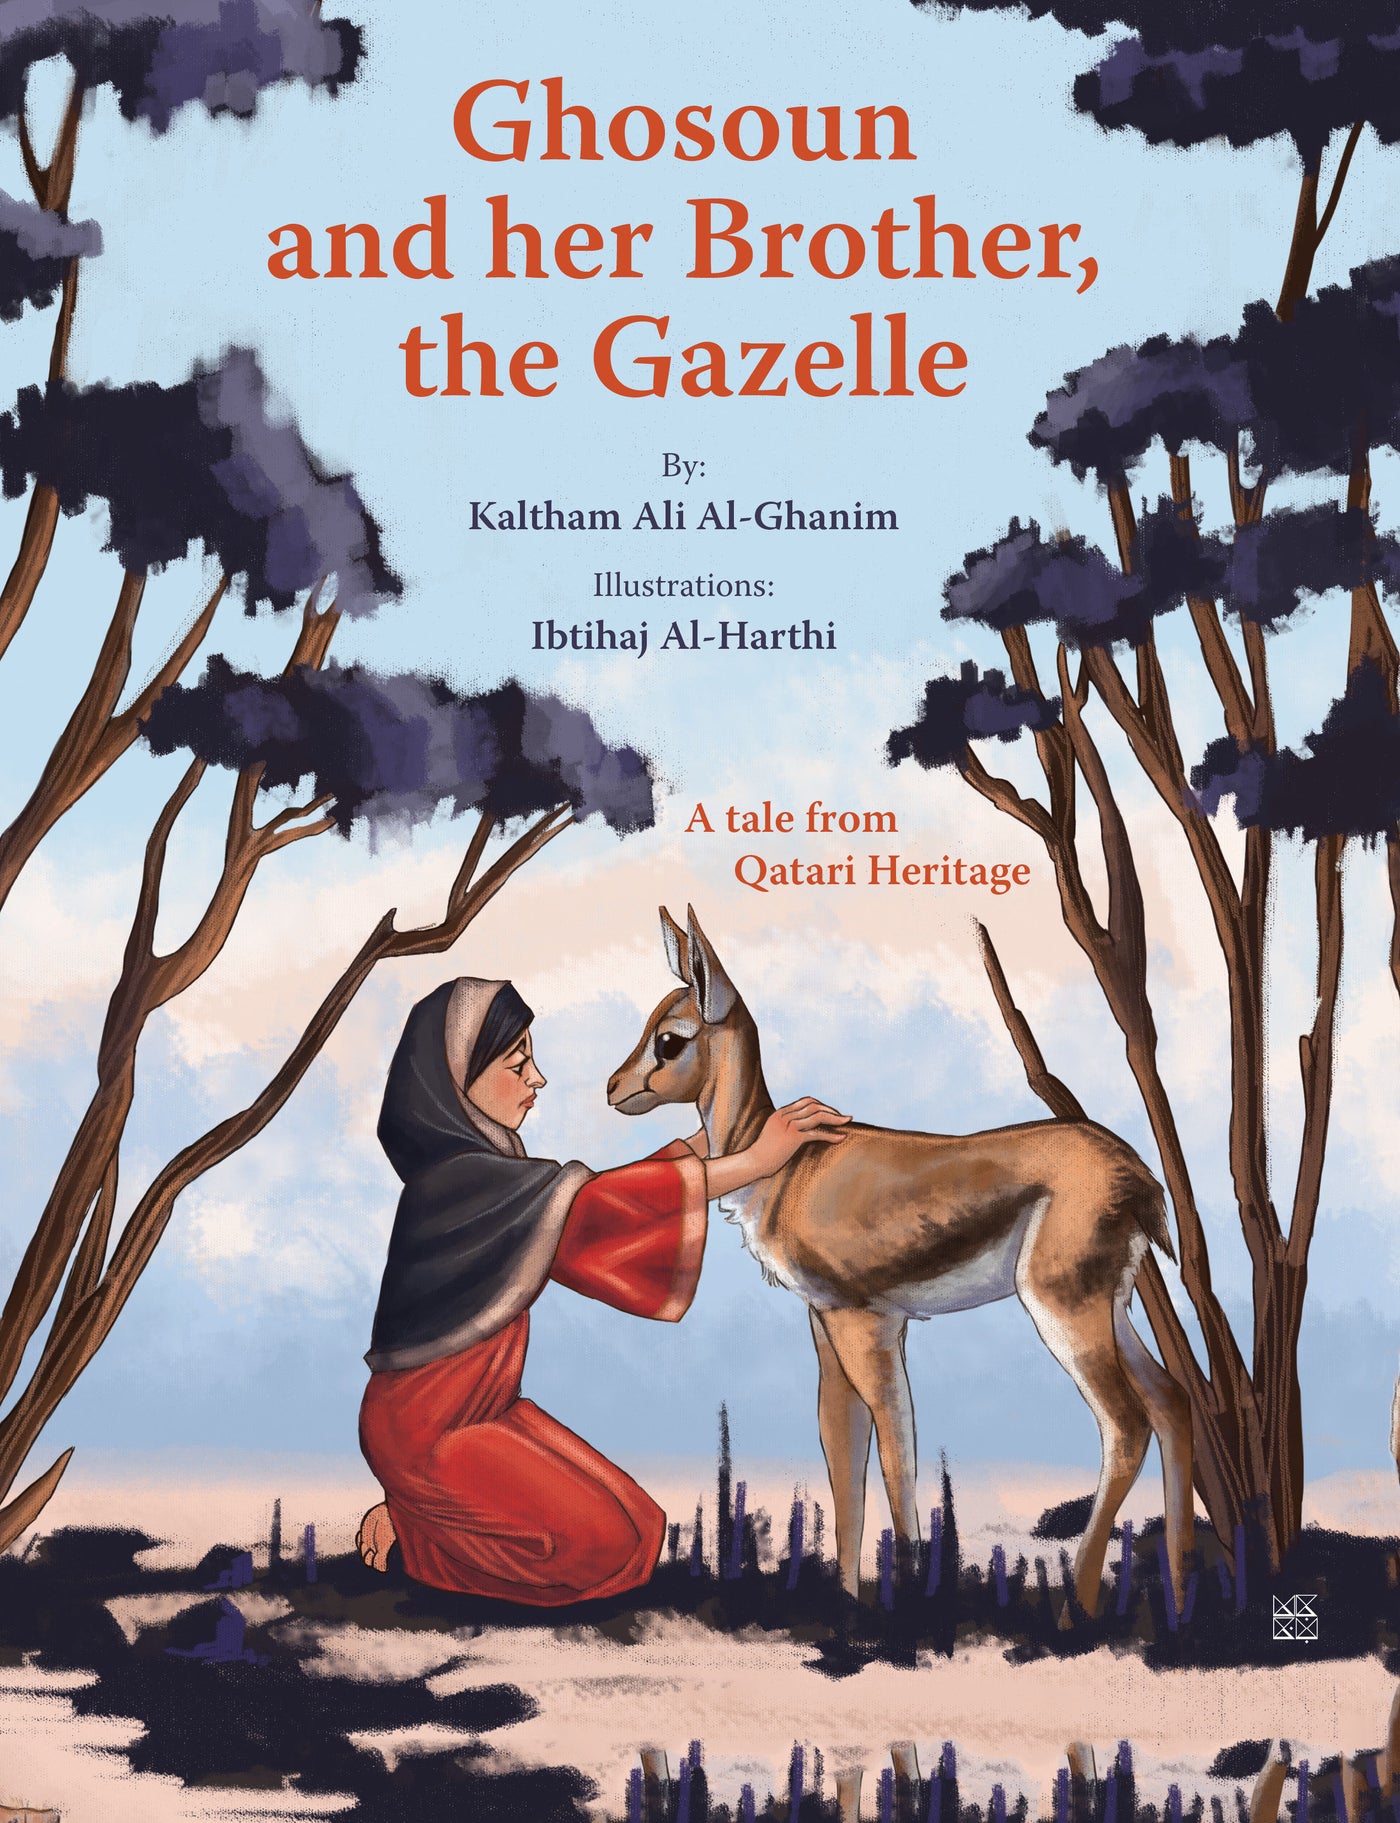 Ghosoun and her Brother, the Gazelle Book Cover